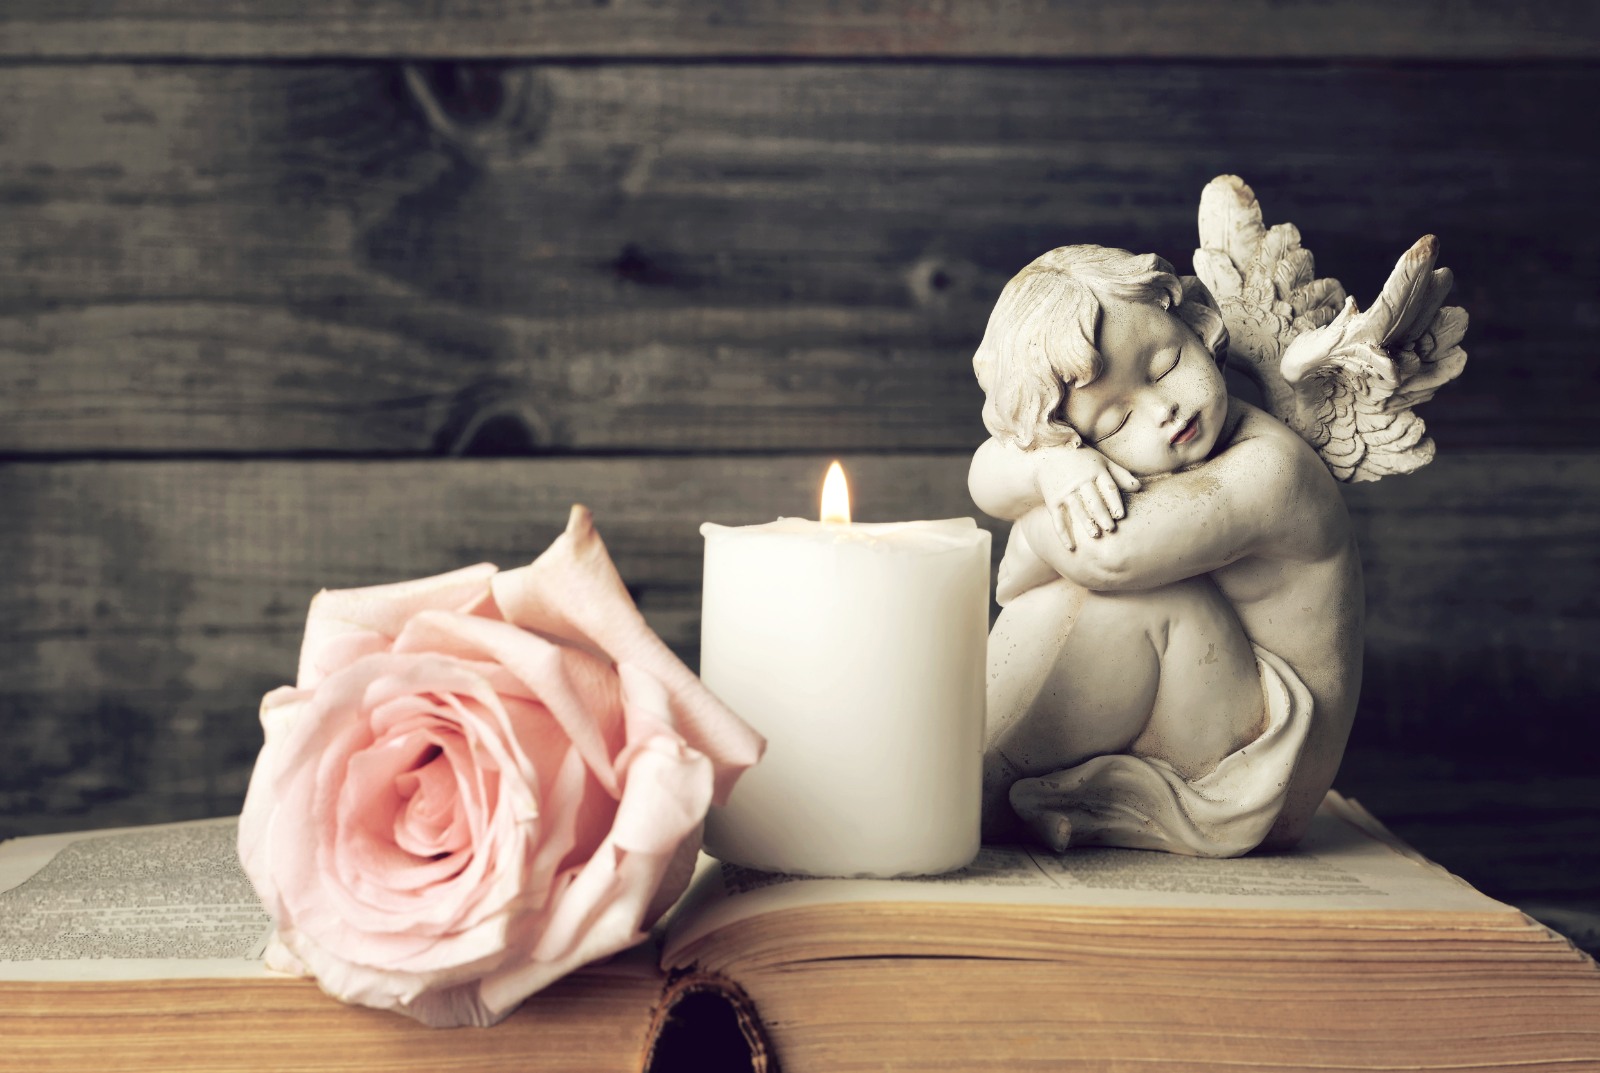 A statue of an angel next to a candle and a pink rose, on top of a book.